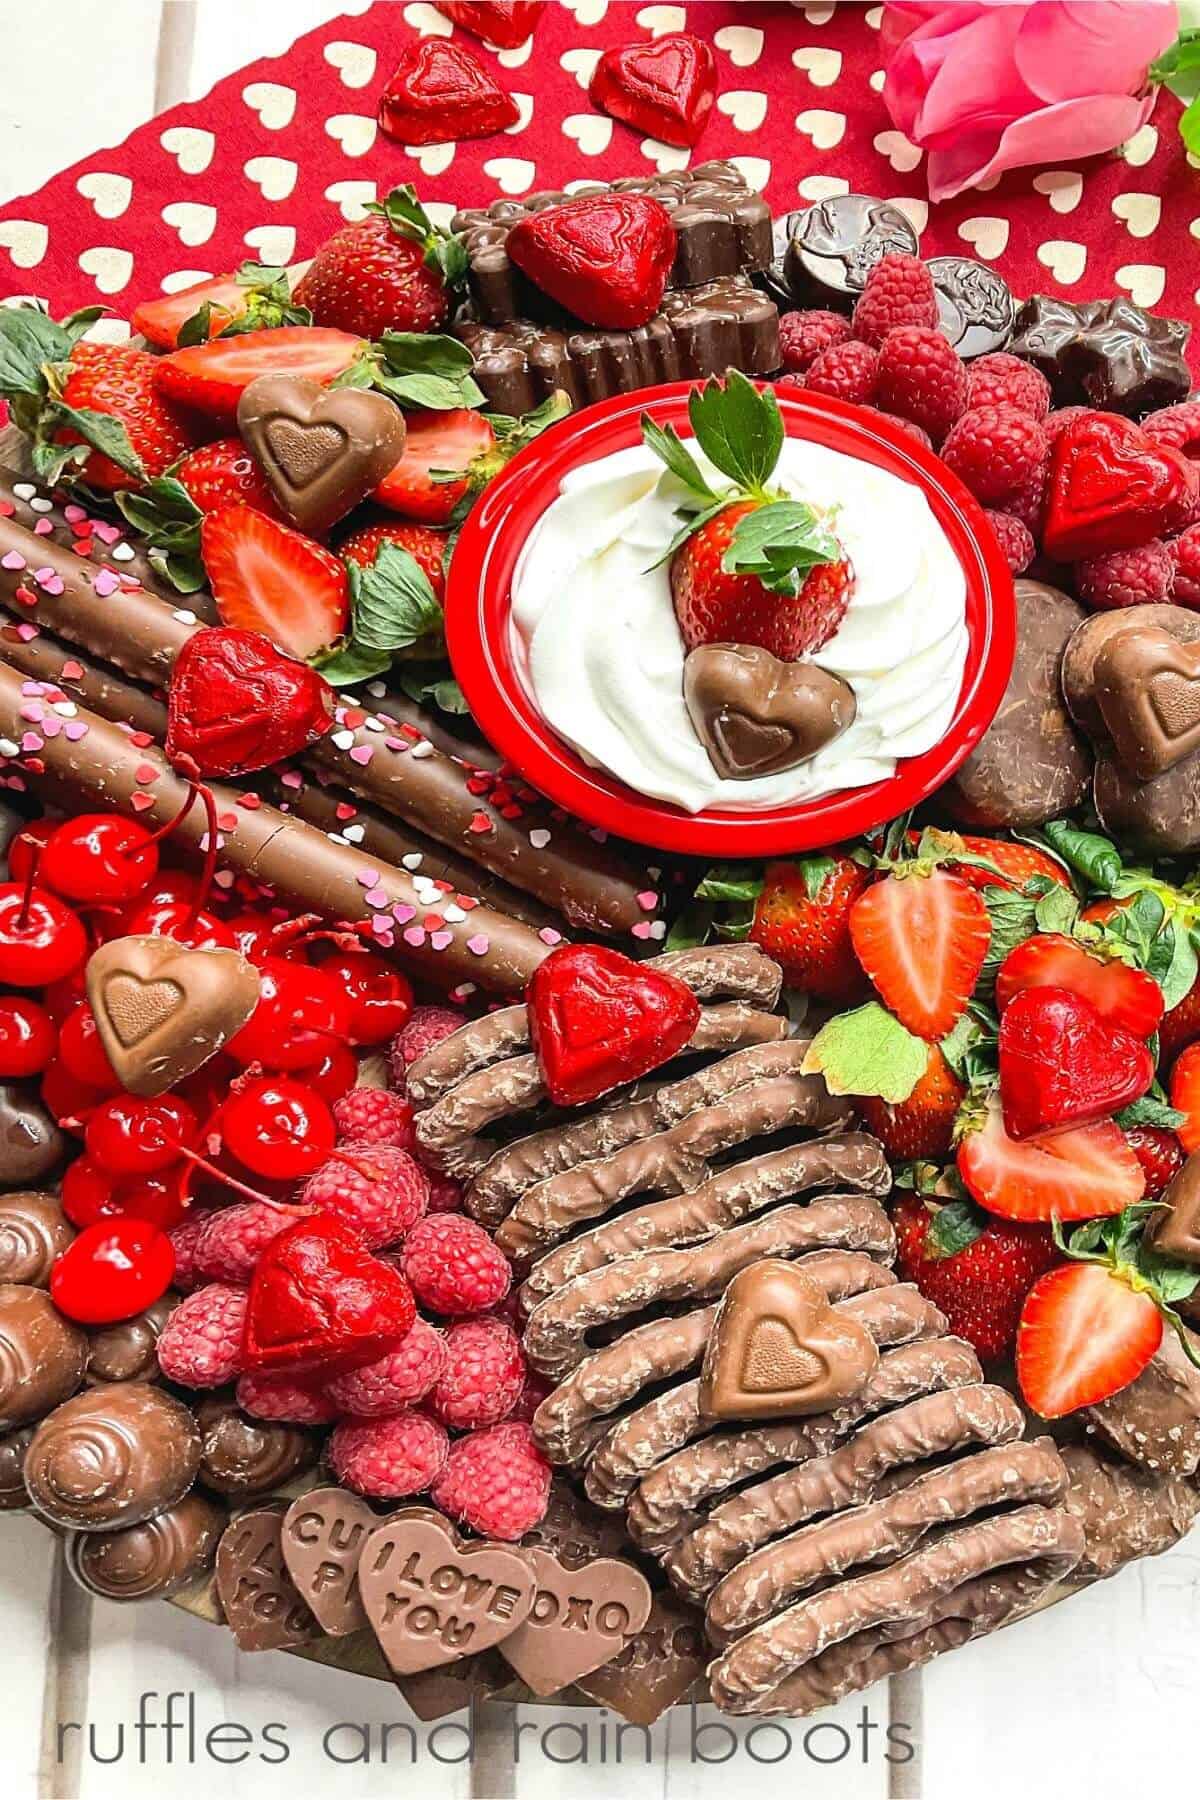 Charcuterie Board close up filled with chocolate pretzels, homemade and store-bought chocolate, fresh strawberries and raspberries, candy and a ramekin filled with dip on a red towel with white hearts on a white surface.